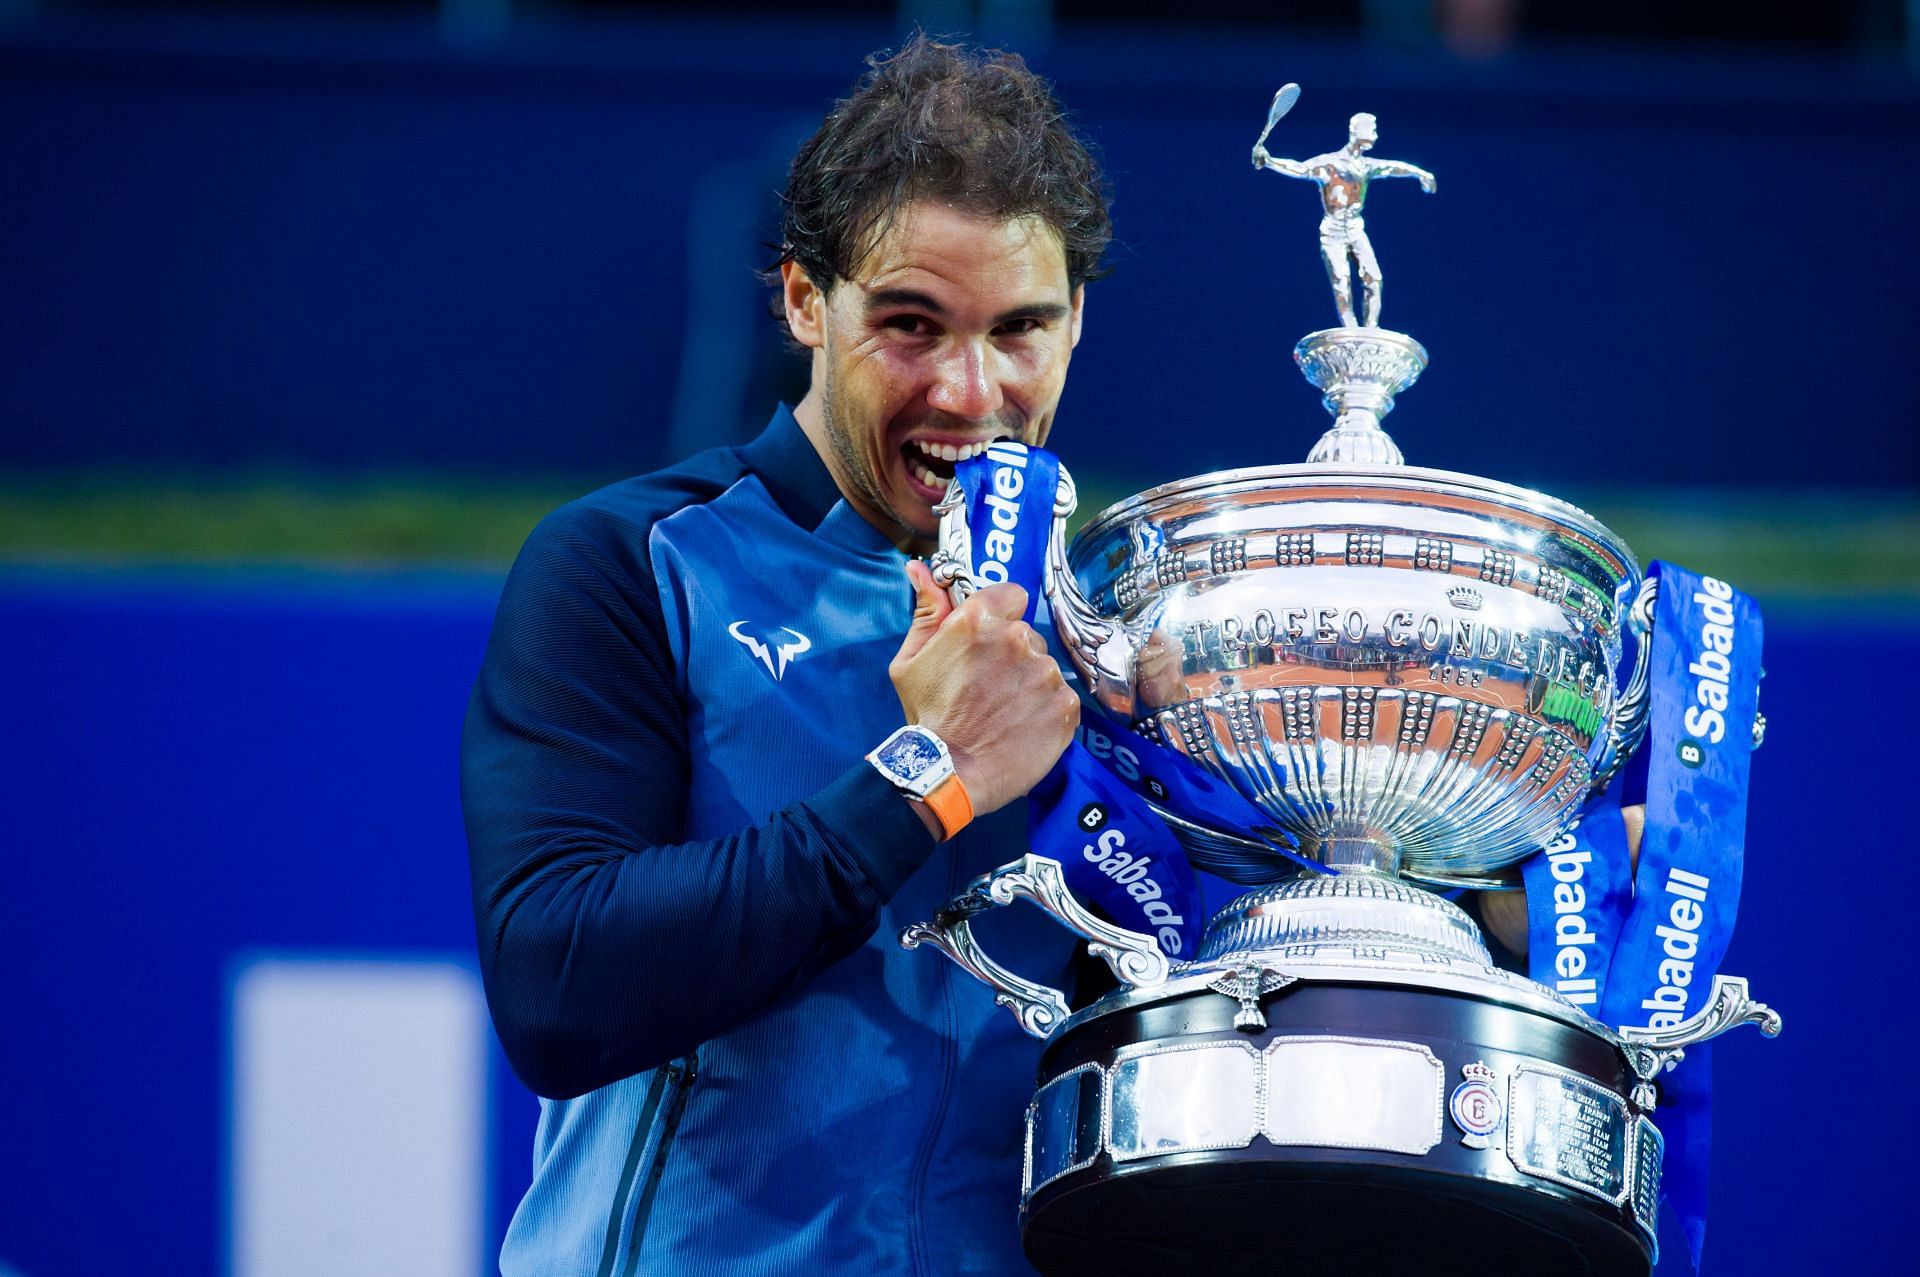 Rafael Nadal has completed the Monte-Carlo and Barcelona Double on 10 occasions till date